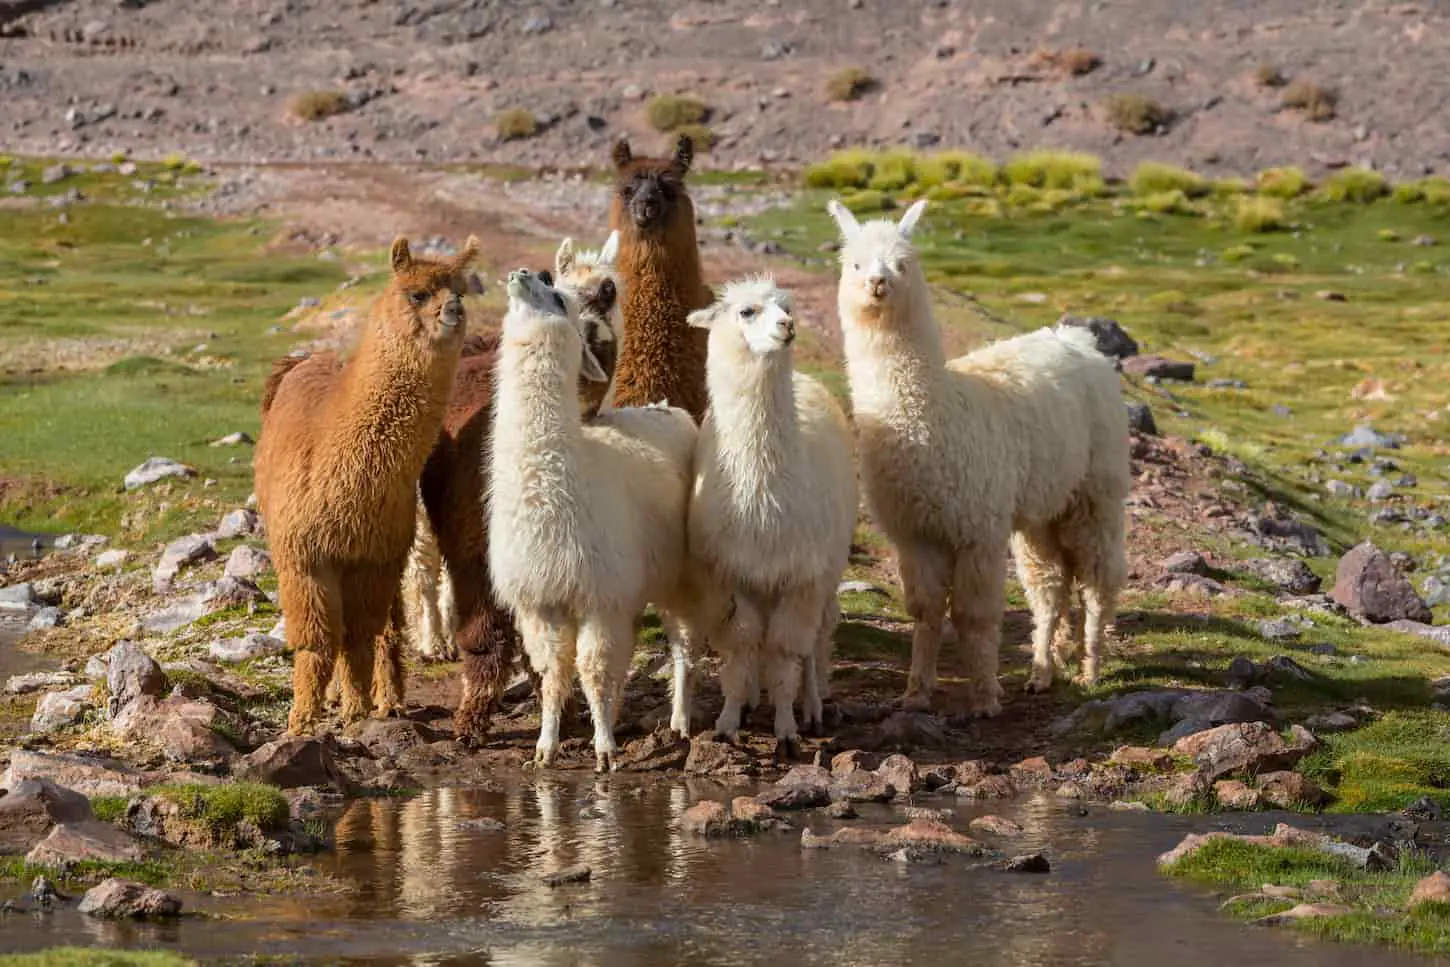 An image of a group of llamas standing infront of a water stream and looking at the camera..